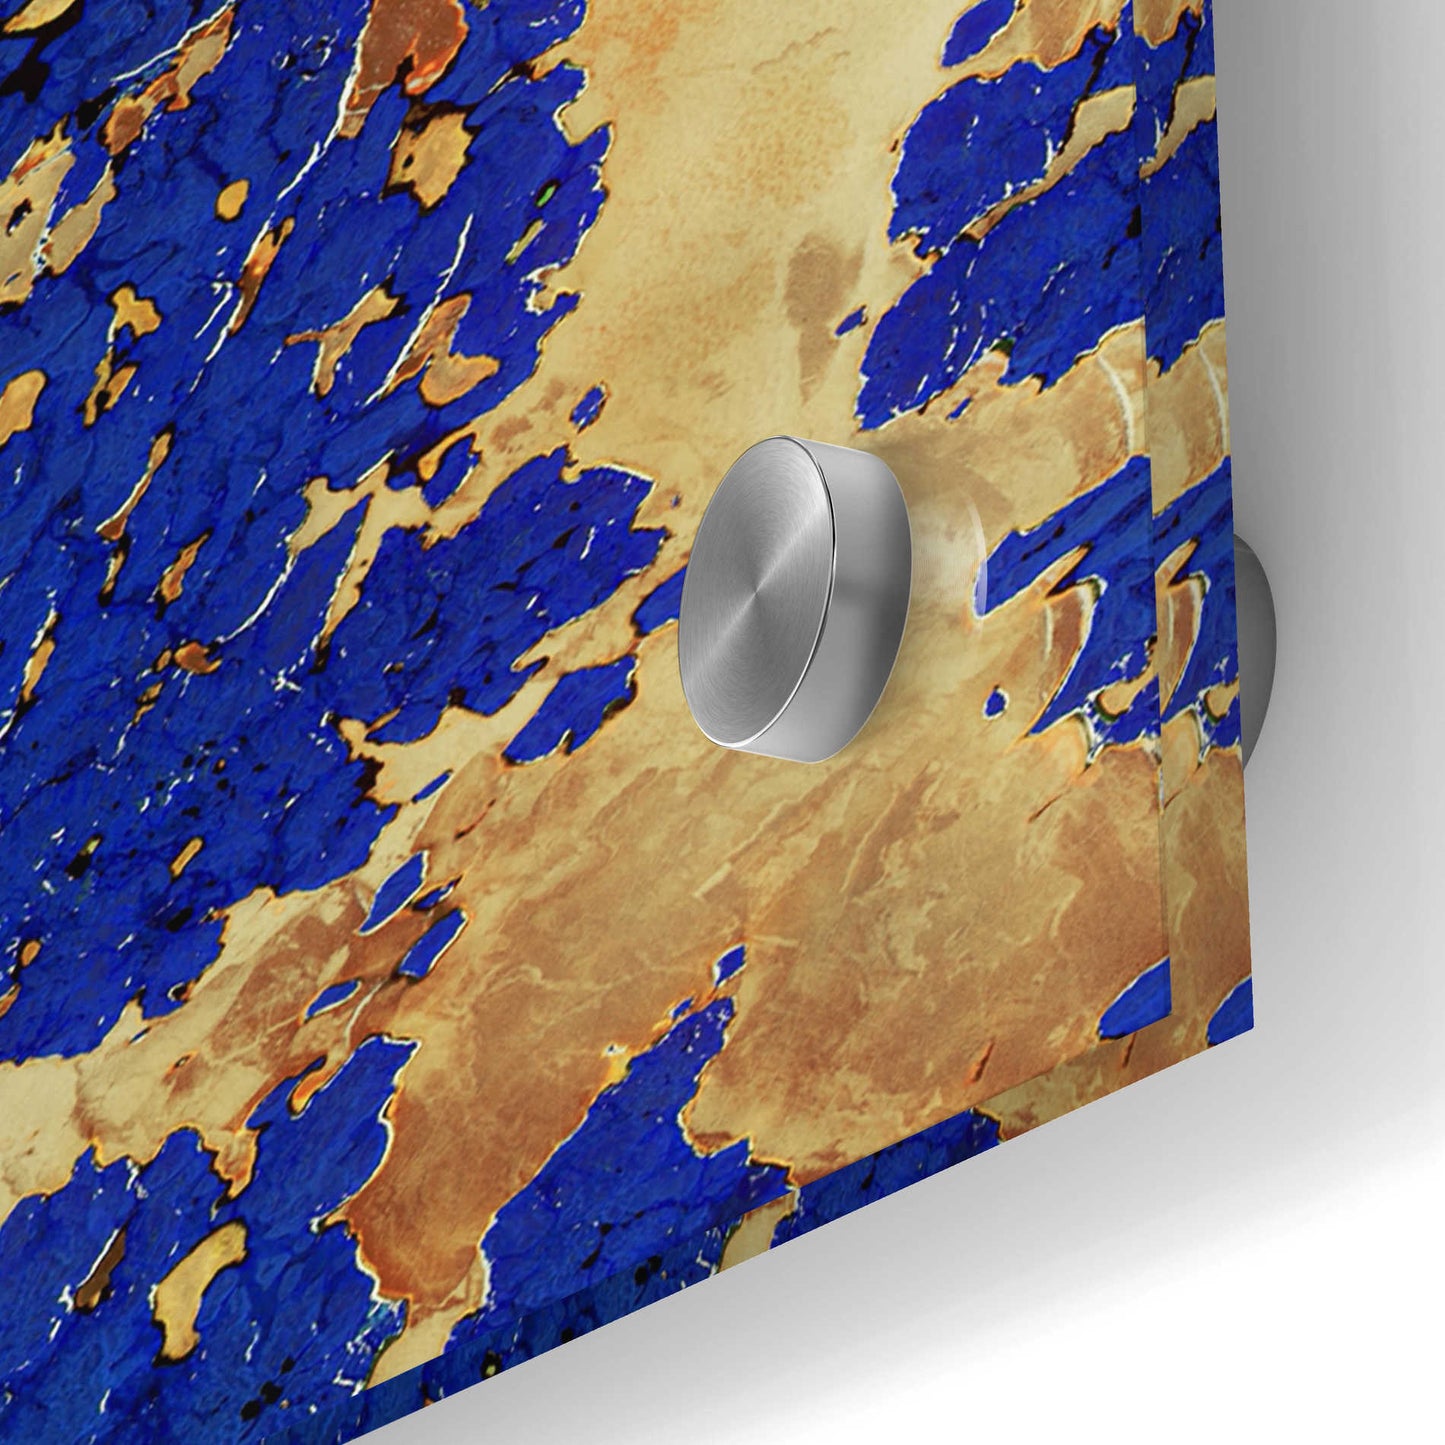 Epic Art 'Earth as Art: Copper and Blue,' Acrylic Glass Wall Art,24x24